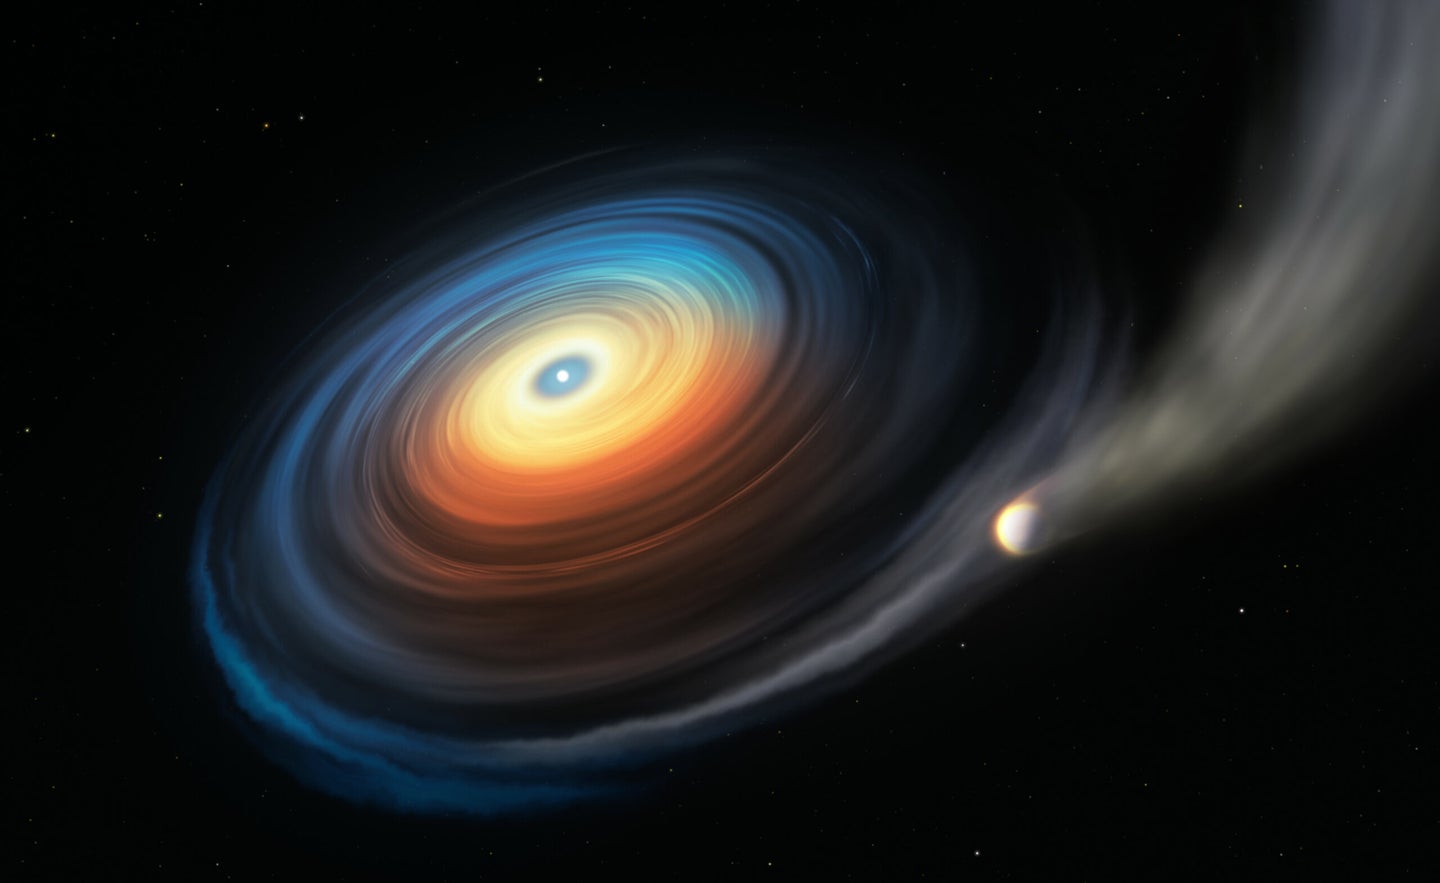 Illustration of a white dwarf eating a large planet.